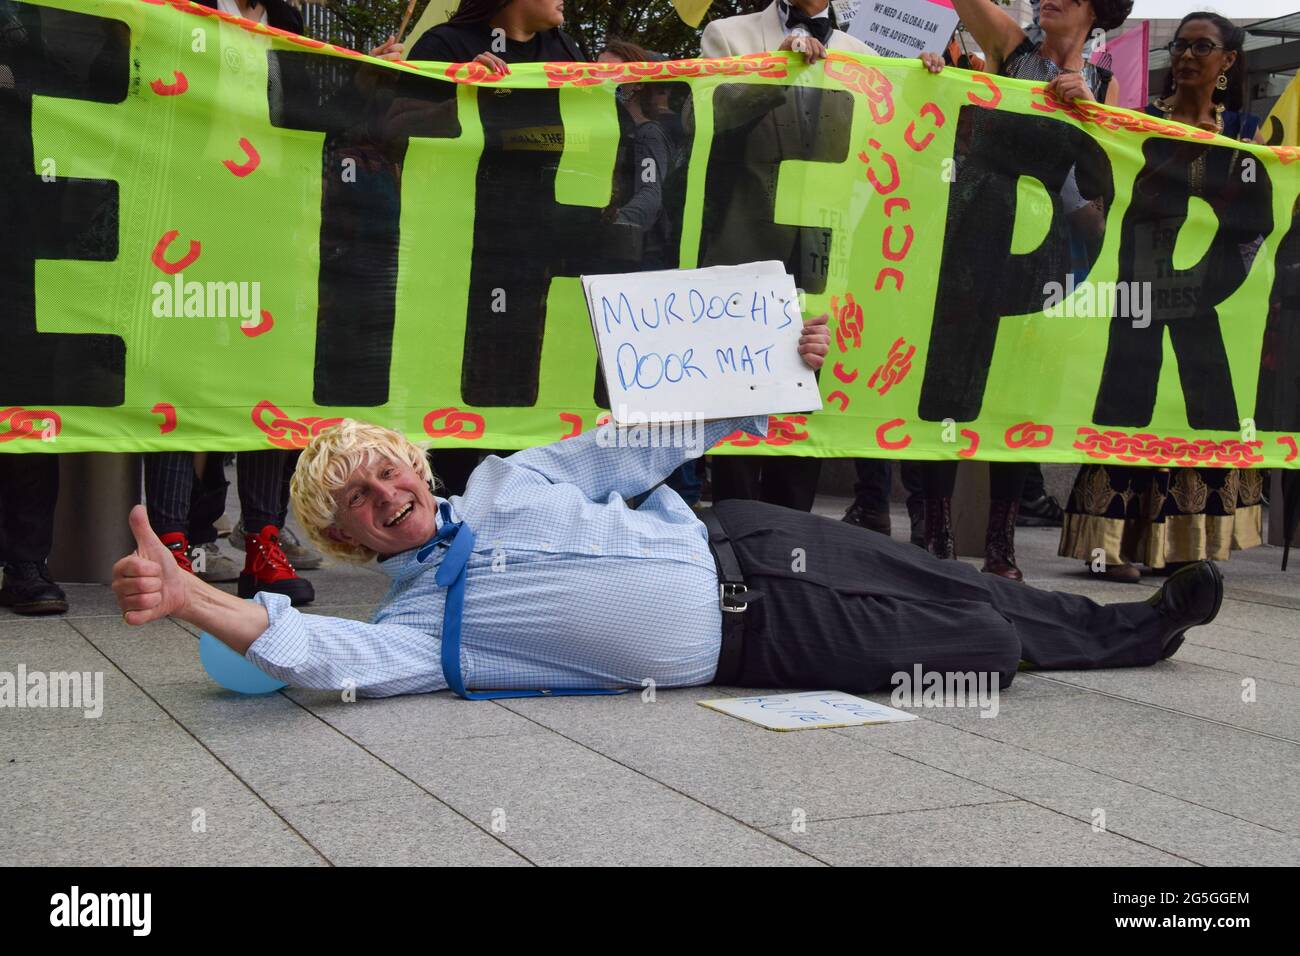 London, United Kingdom. 27th June 2021. A demonstrator dressed as Boris Johnson lies down outside News UK during the Free The Press protest. Extinction Rebellion demonstrators marched from Parliament Square to News UK headquarters, owned by Rupert Murdoch, in London Bridge, in protest of misinformation, corruption, and the inaccurate and insufficient coverage of the climate crisis by Murdoch's newspapers. (Credit: Vuk Valcic / Alamy Live News) Stock Photo